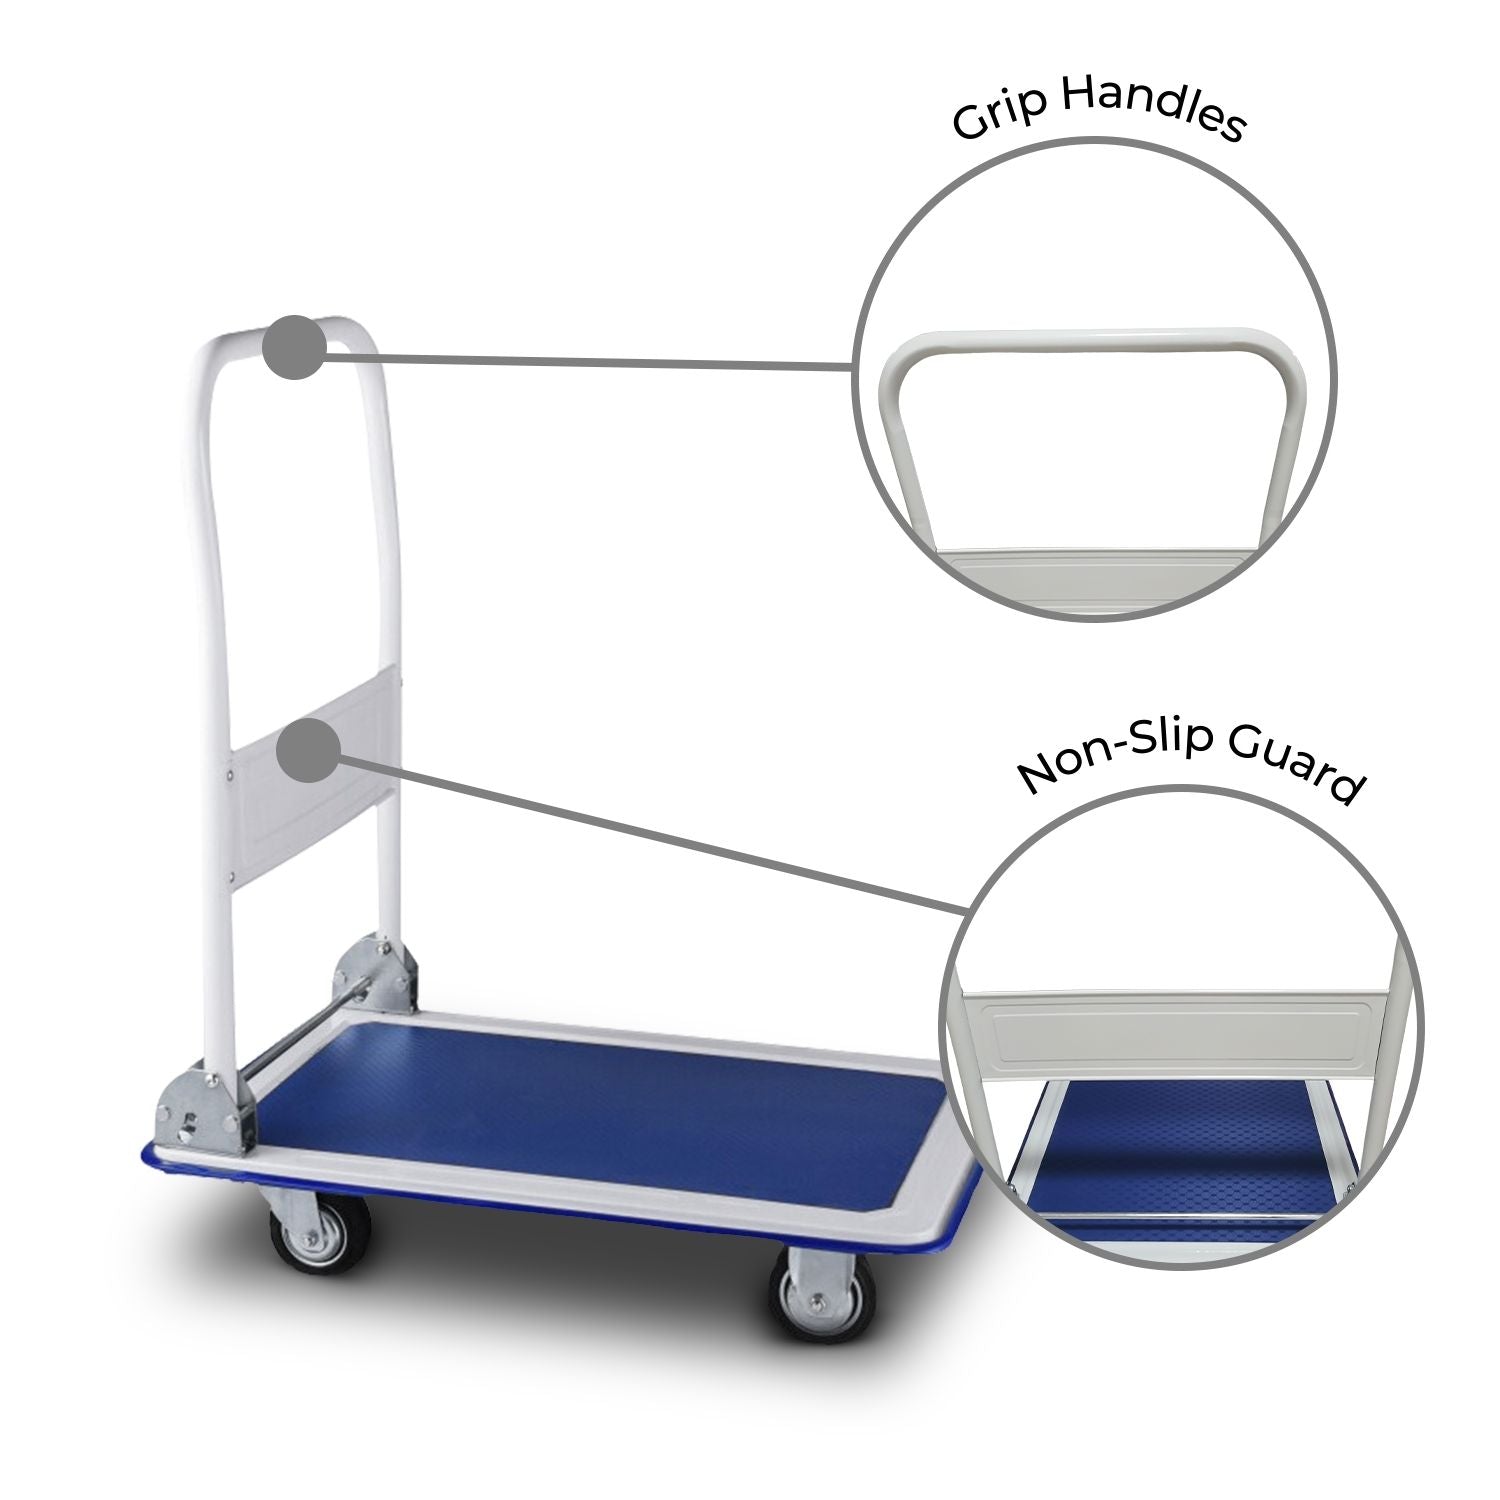 RYNOMATE Foldable Platform Trolley with 4 Wheels (Blue and White)